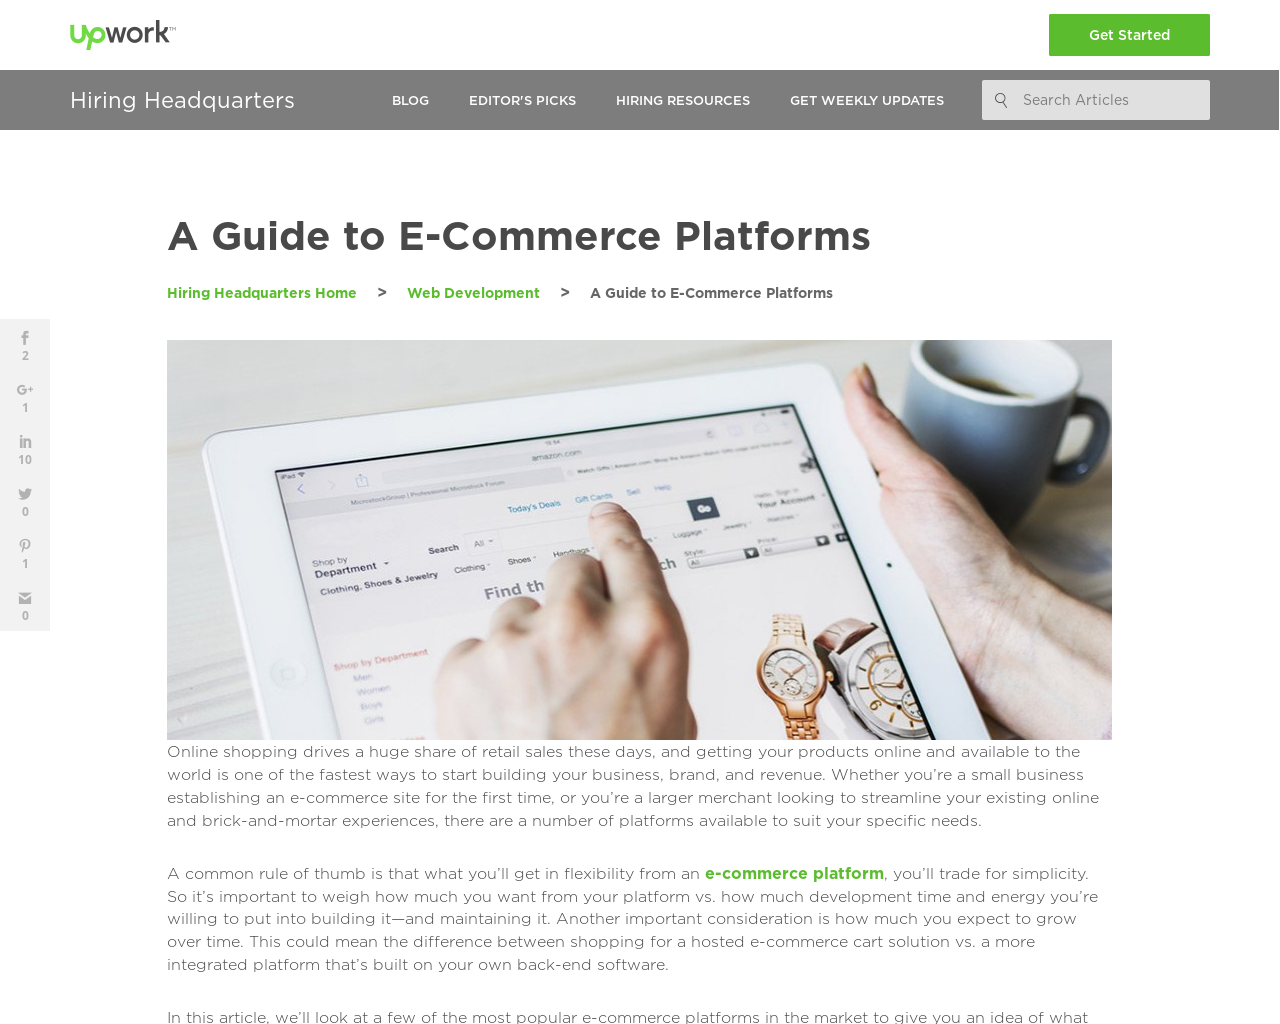 Guide: A Guide to E-Commerce Platforms